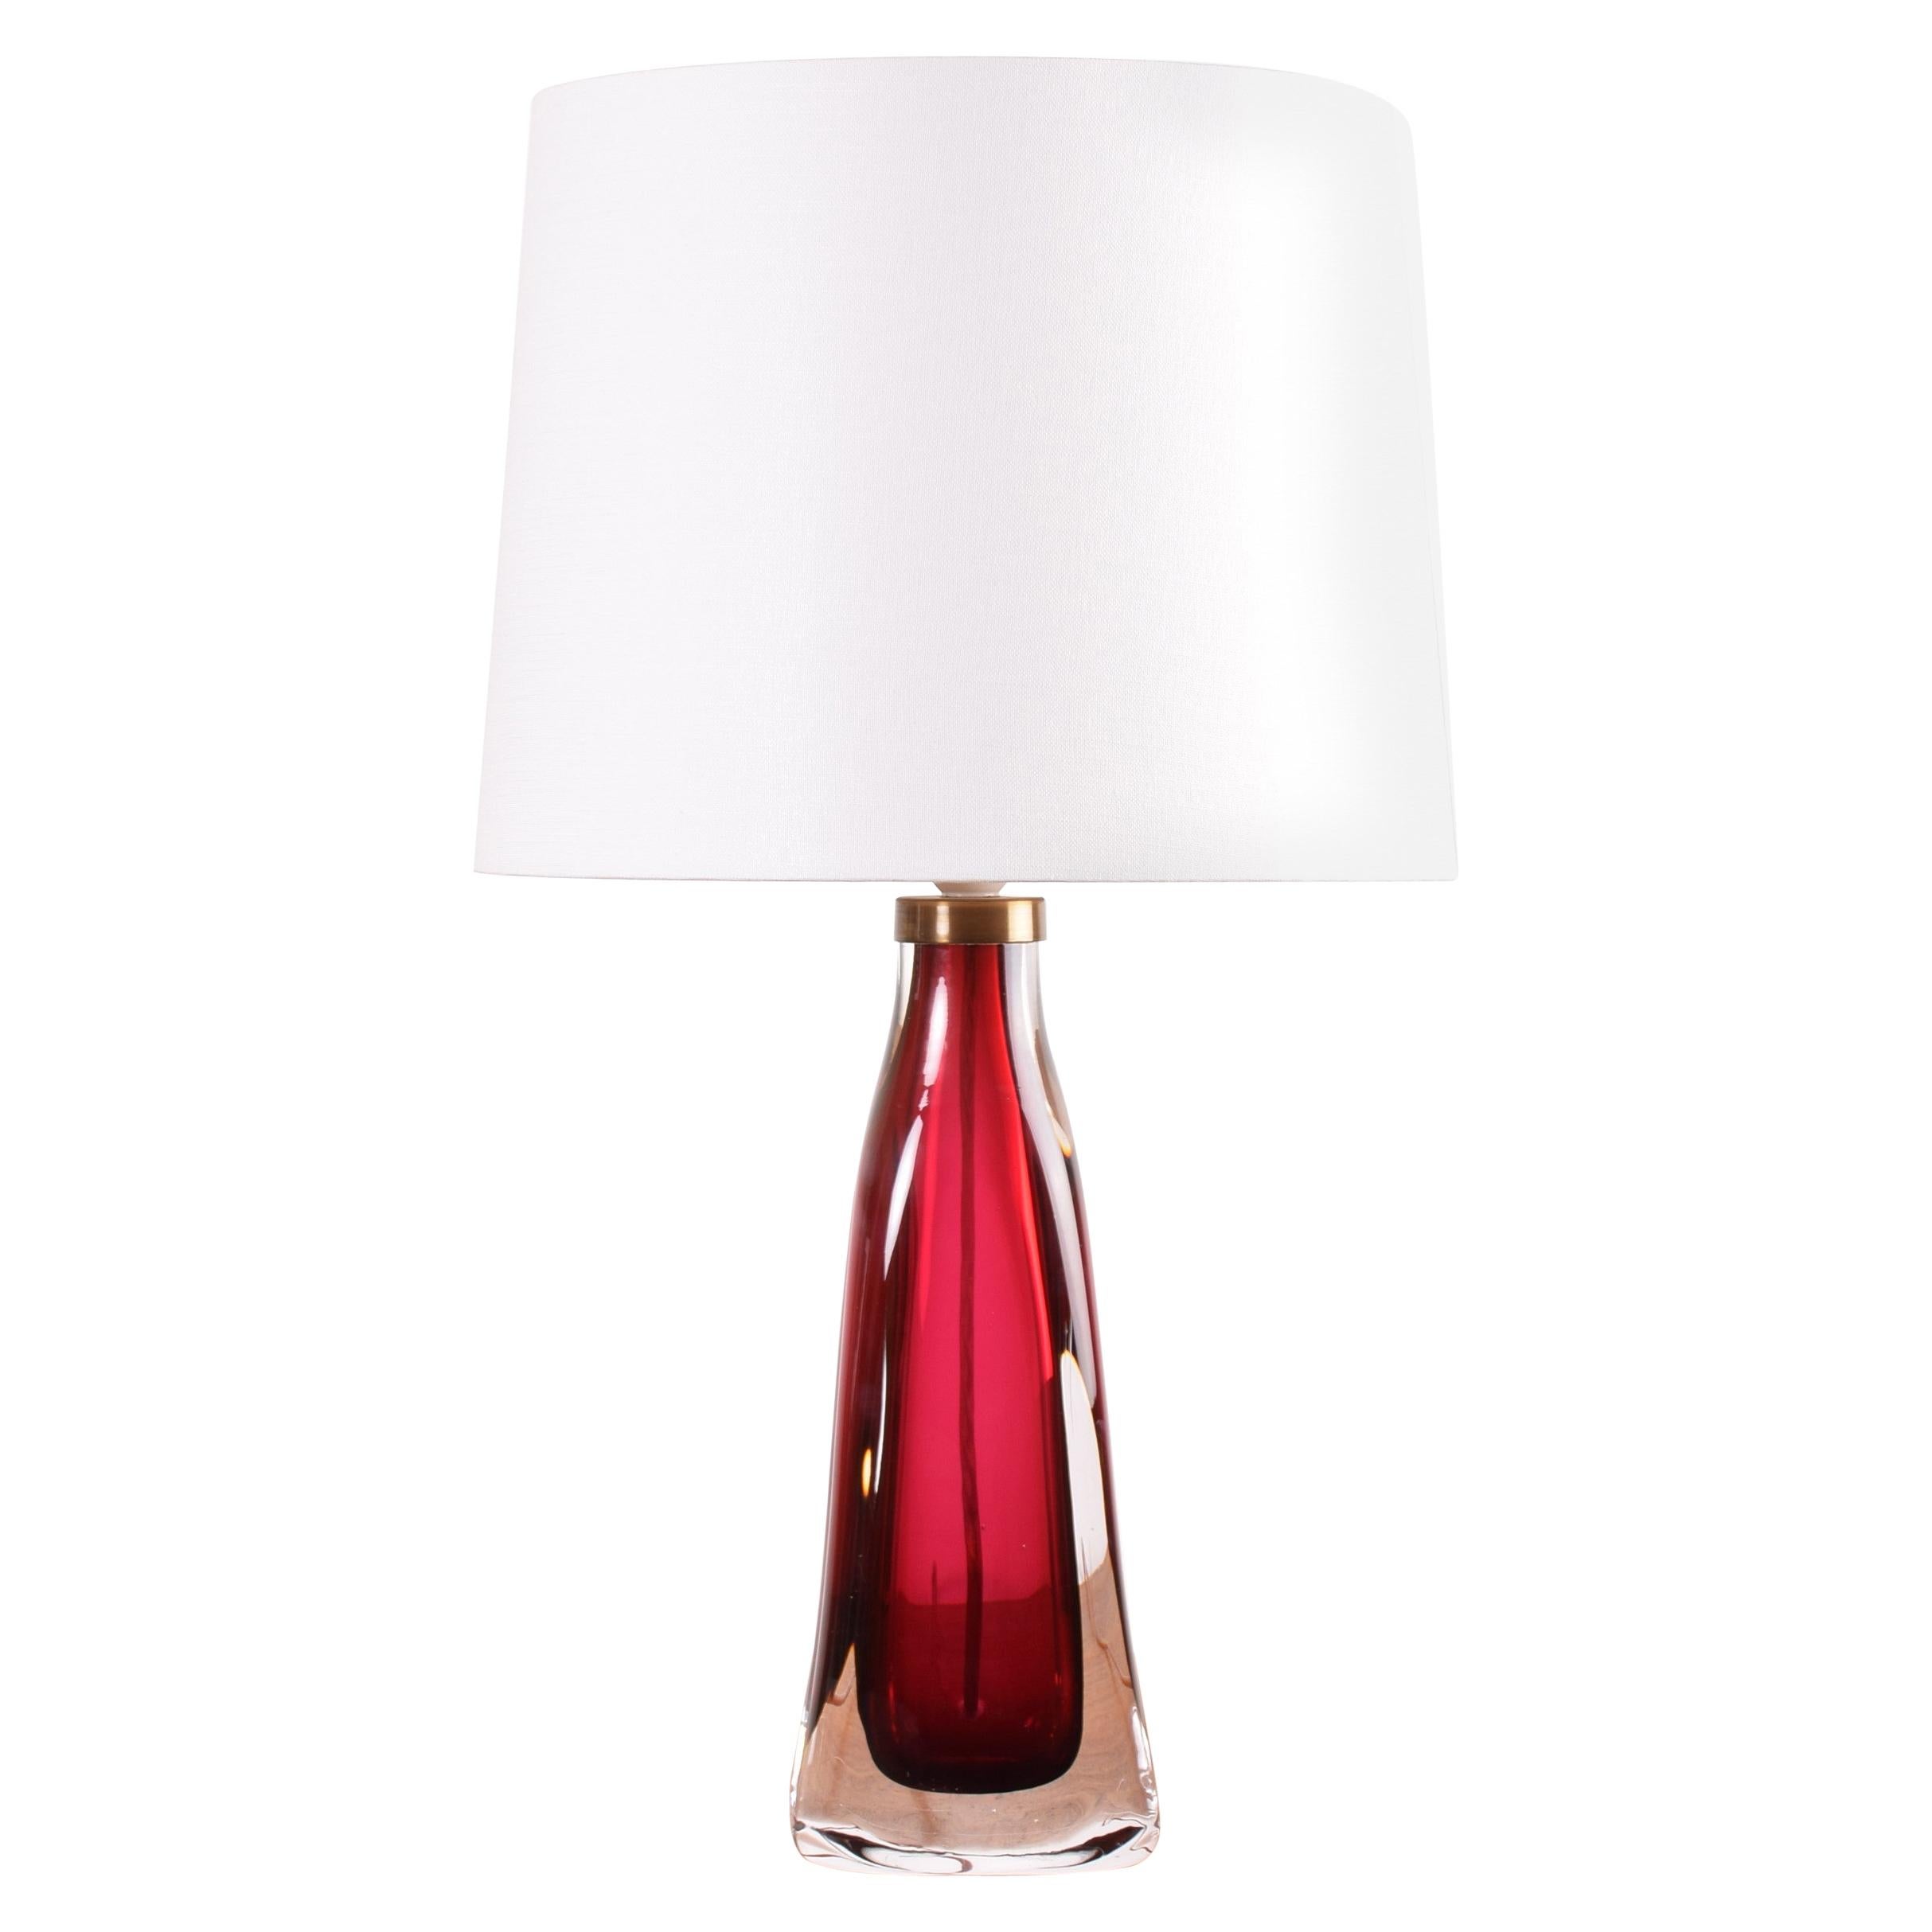 Carl Fagerlund Red Crystal Glass Table Lamp for Orrefors Sweden Midcentury 1960s